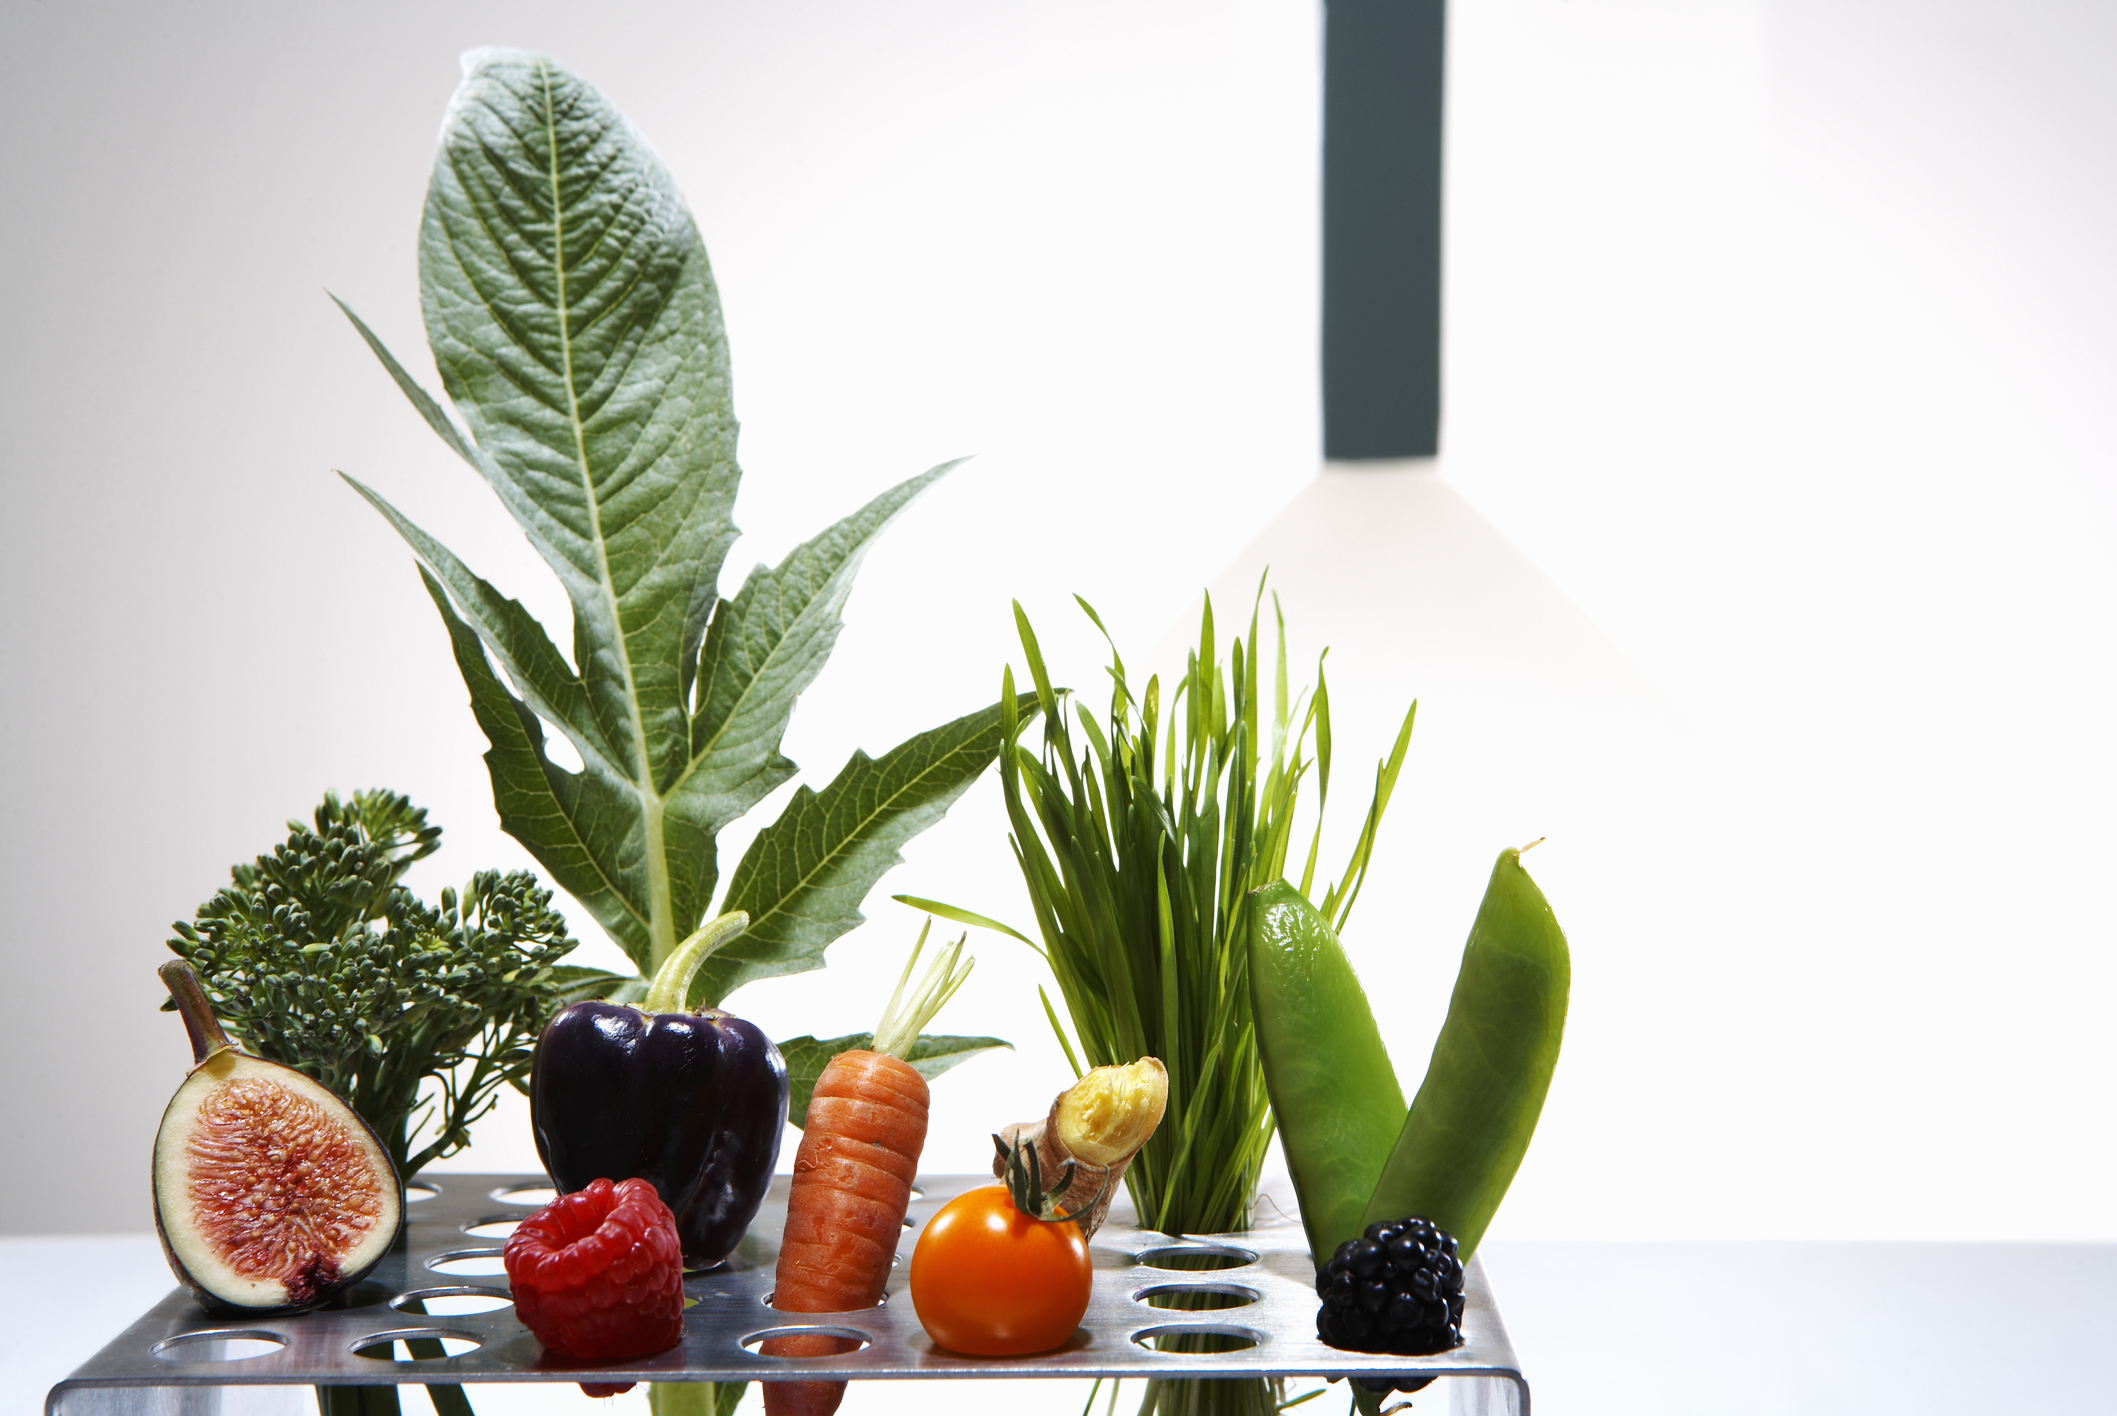 A silver tray stand with a half of fig, raspberry, carrot, orange tomato, purple bell pepper, two beans, and three different types of leafy greens 